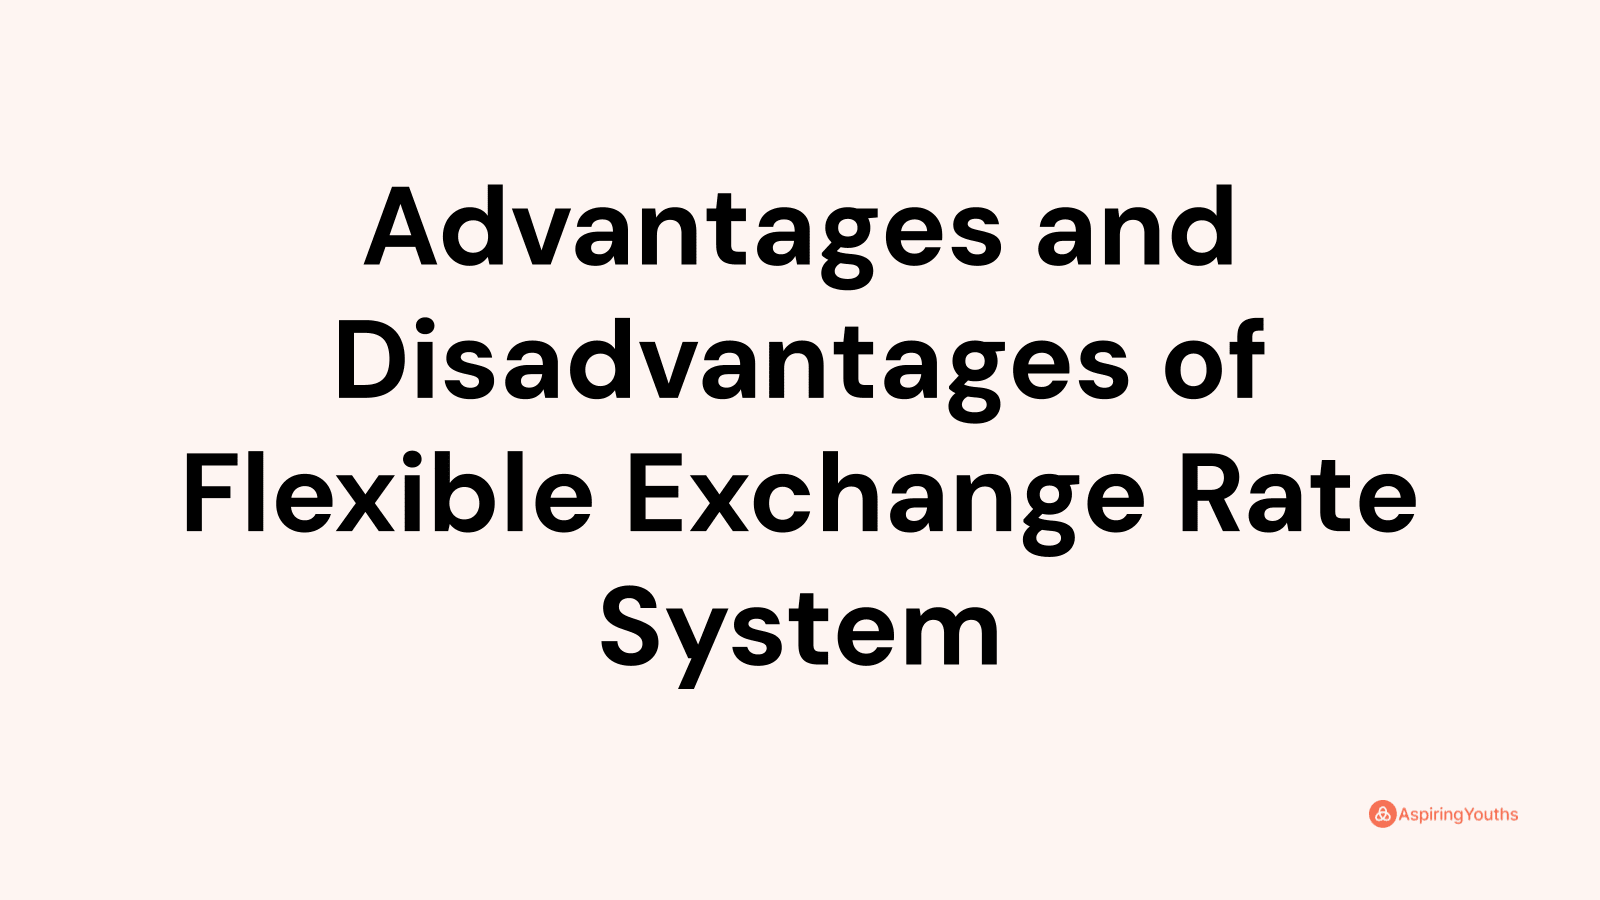 Advantages and disadvantages of Flexible Exchange Rate System